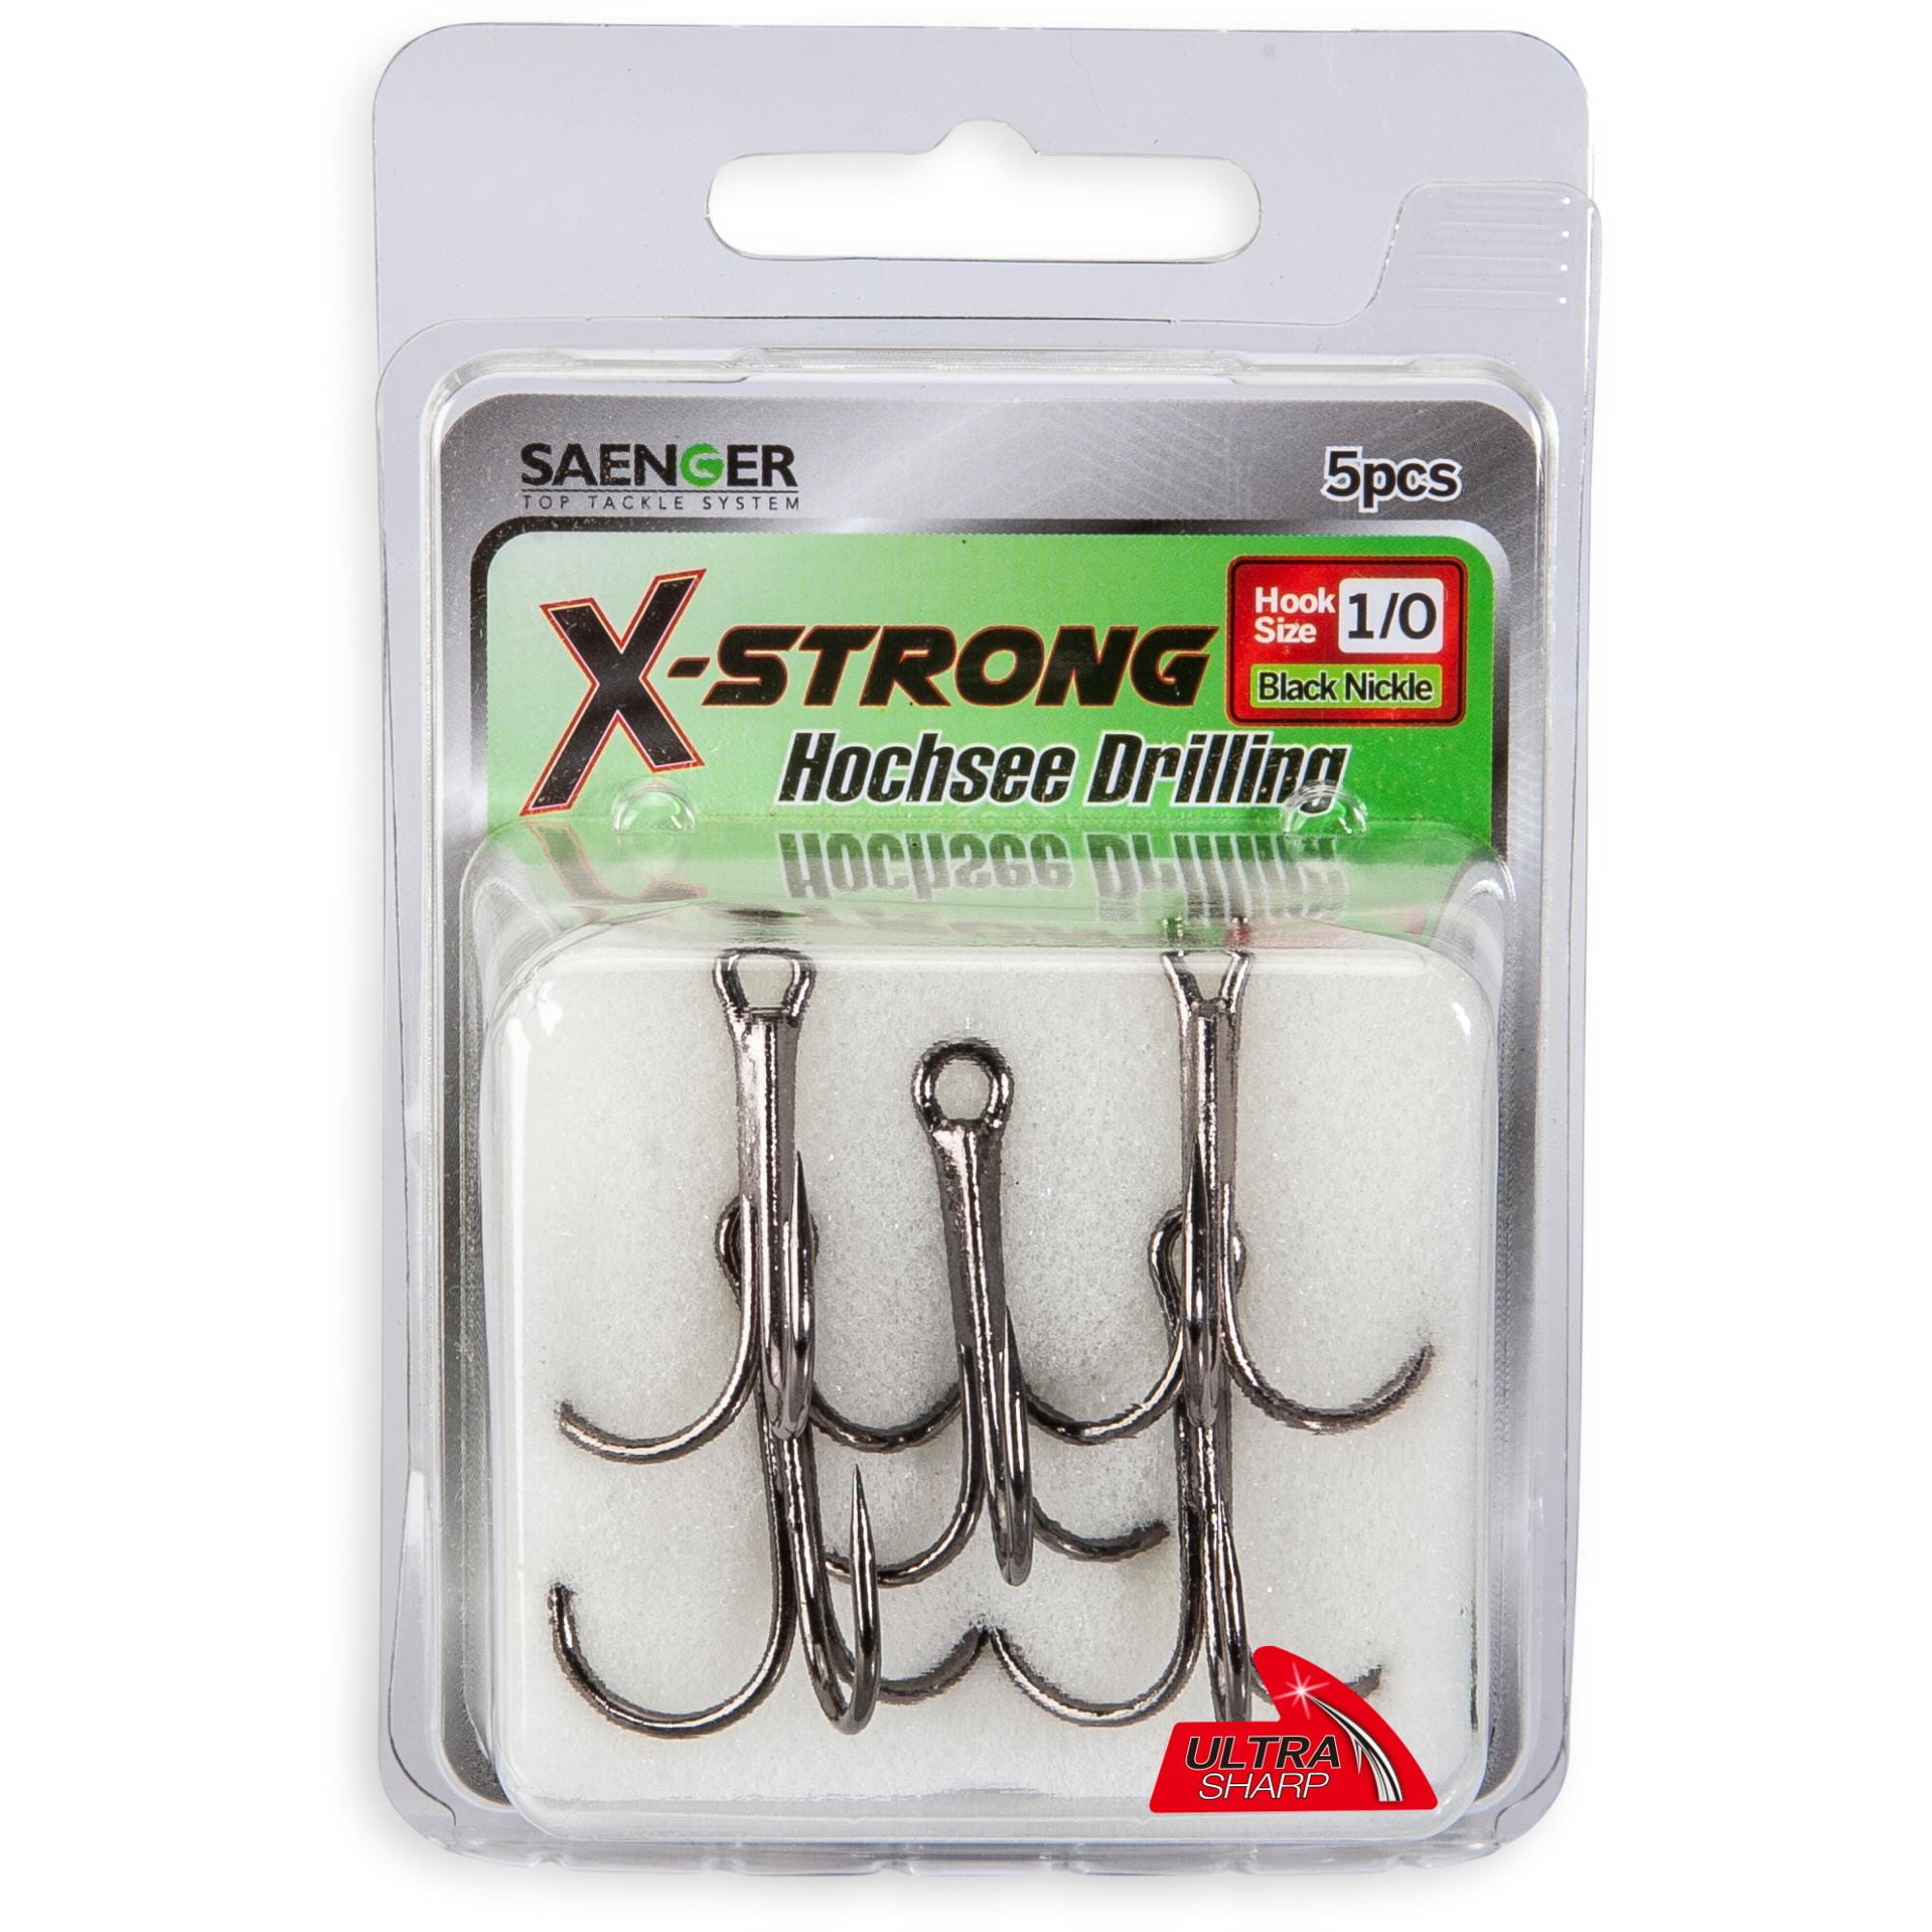 Saenger X-Strong Black Nickel treble hook size 2/0 5 pieces